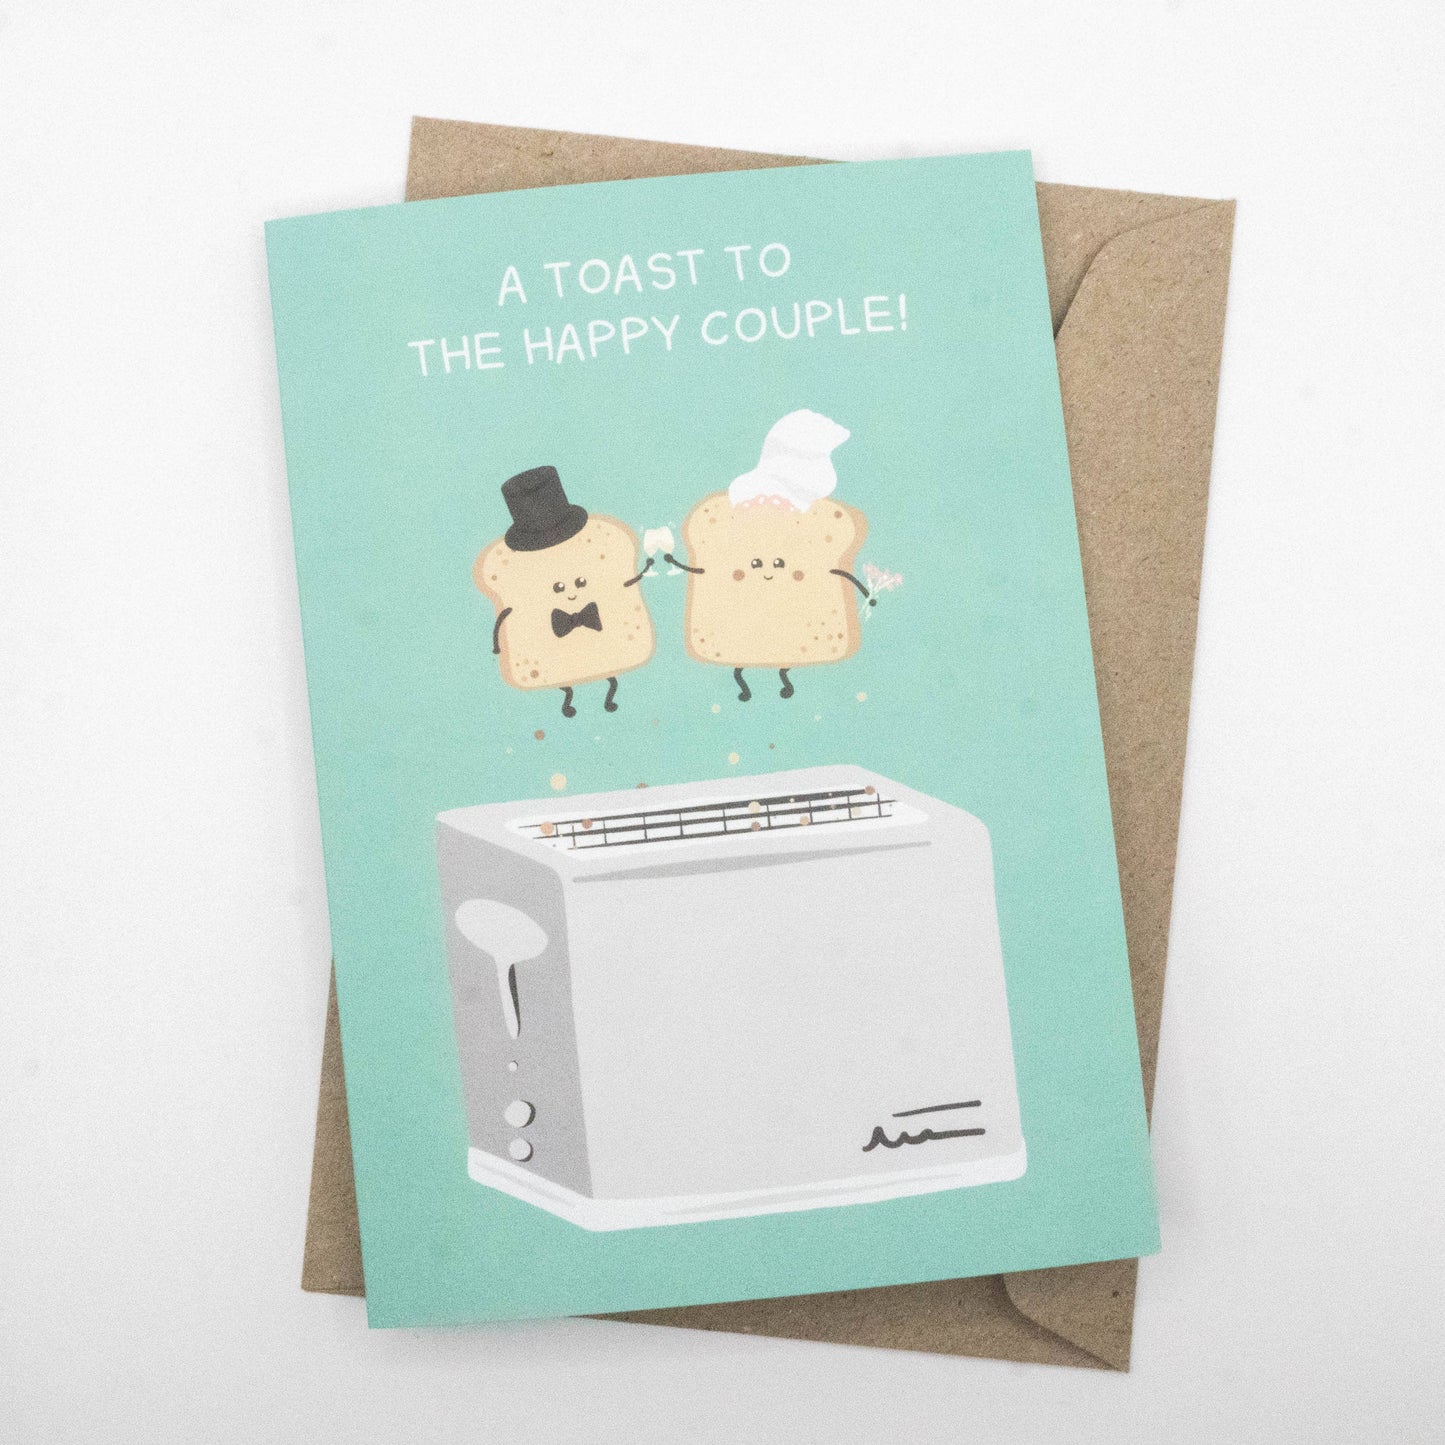 Tilly Scribbles- 'A Toast To The Happy Couple!' Wedding Card